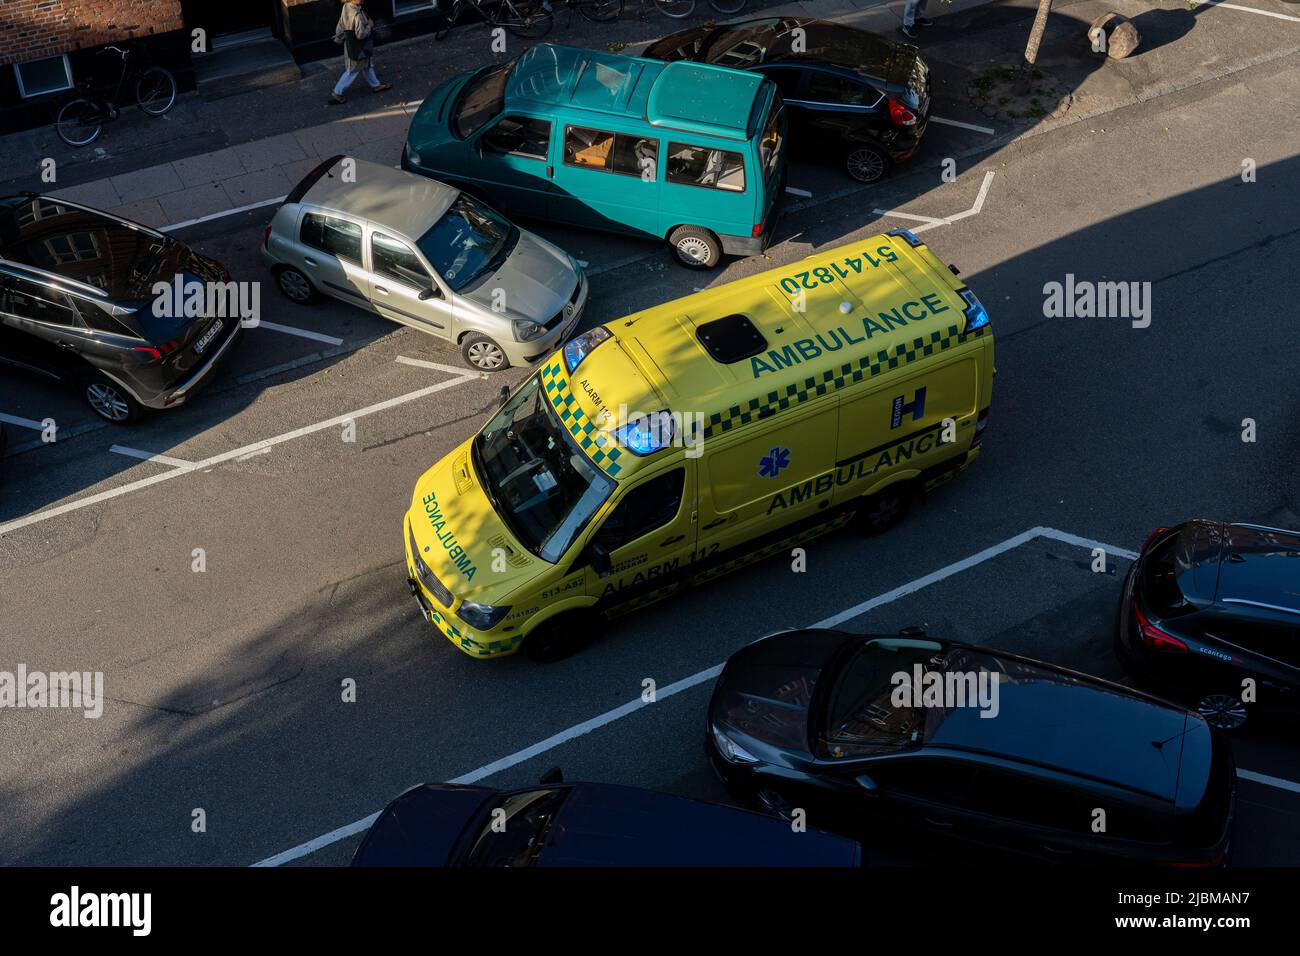 High Angle View of an Ambulance in Copenhagen Stock Photo